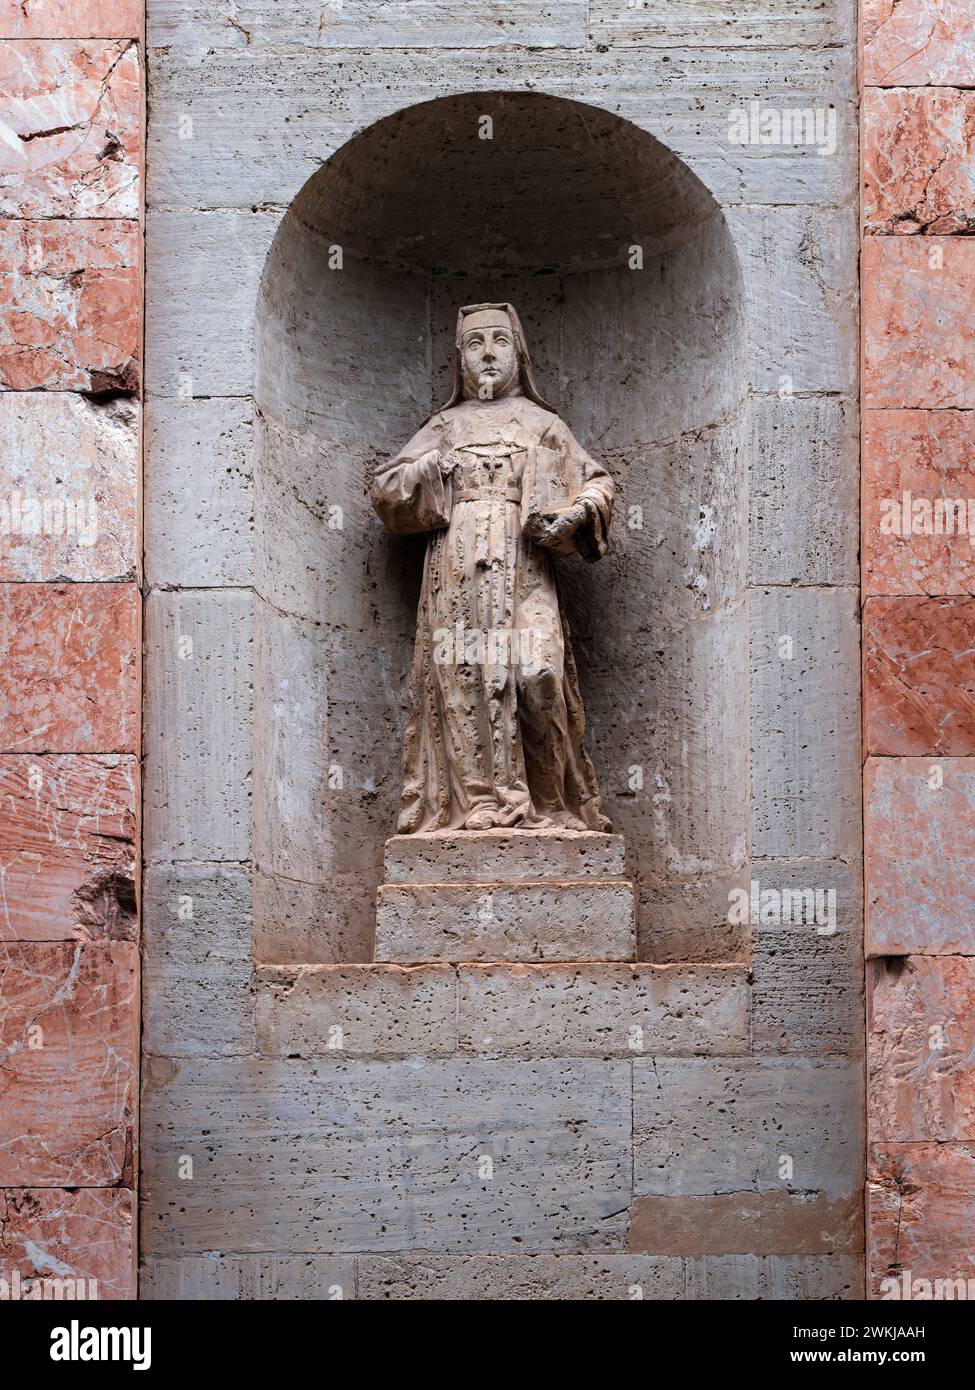 The small statue of a nun shows the scars from a past conflict in Orihuela, Alicante, Spain. Stock Photo